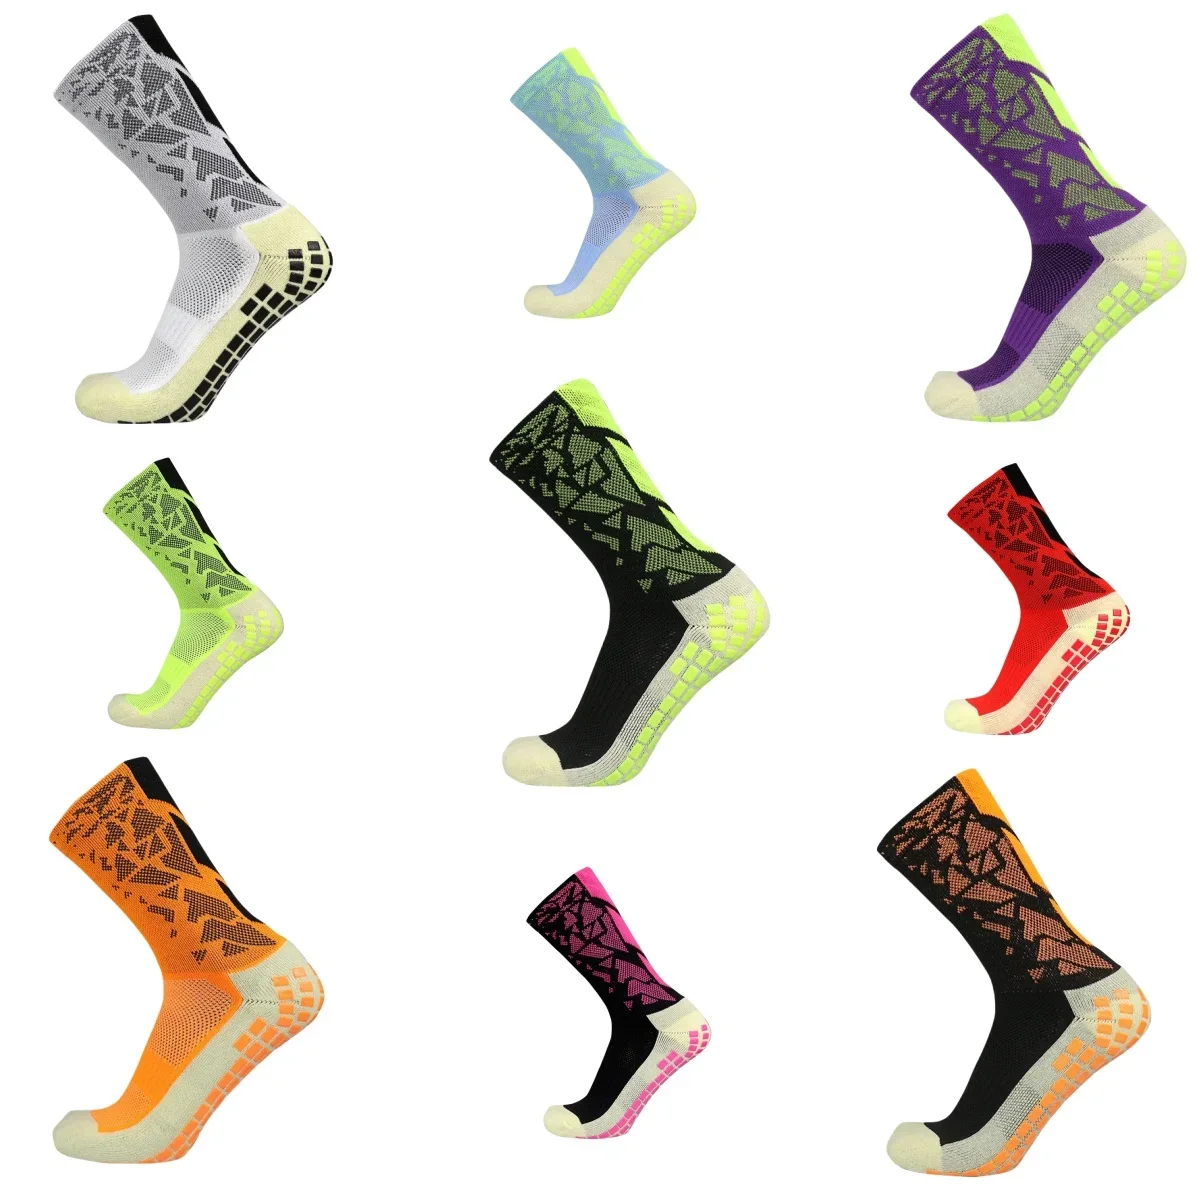 

2 Pairs Professional Men Women Camouflage Arrow Soccer Socks Breathable Sports Silicone Anti Slip Grip Football